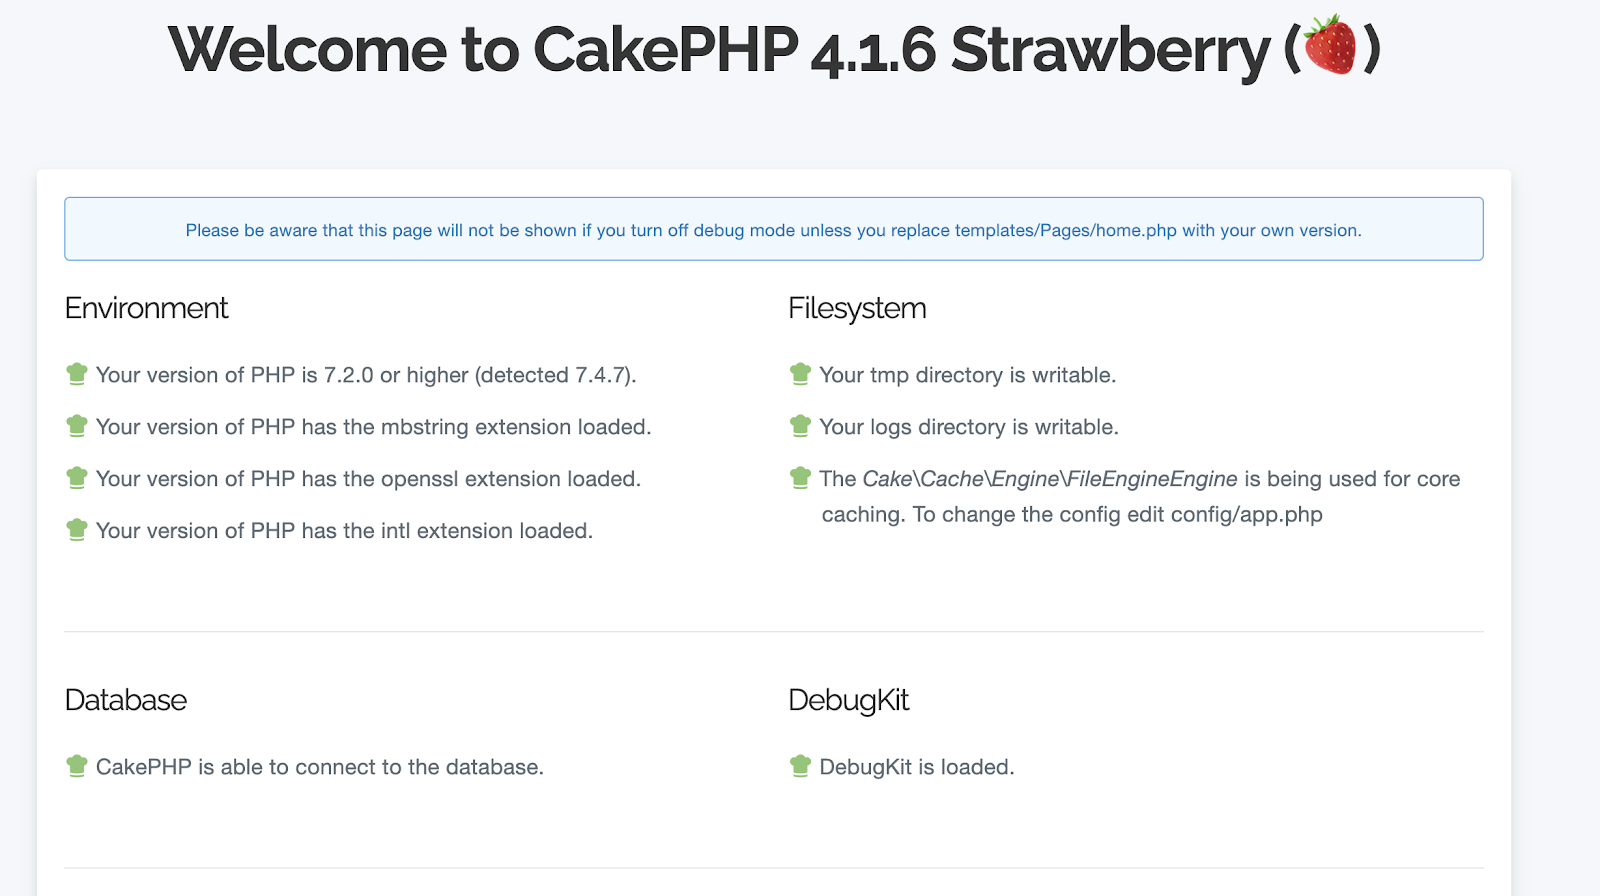 Welcome to CakePHP 4.1.6 Strawberry